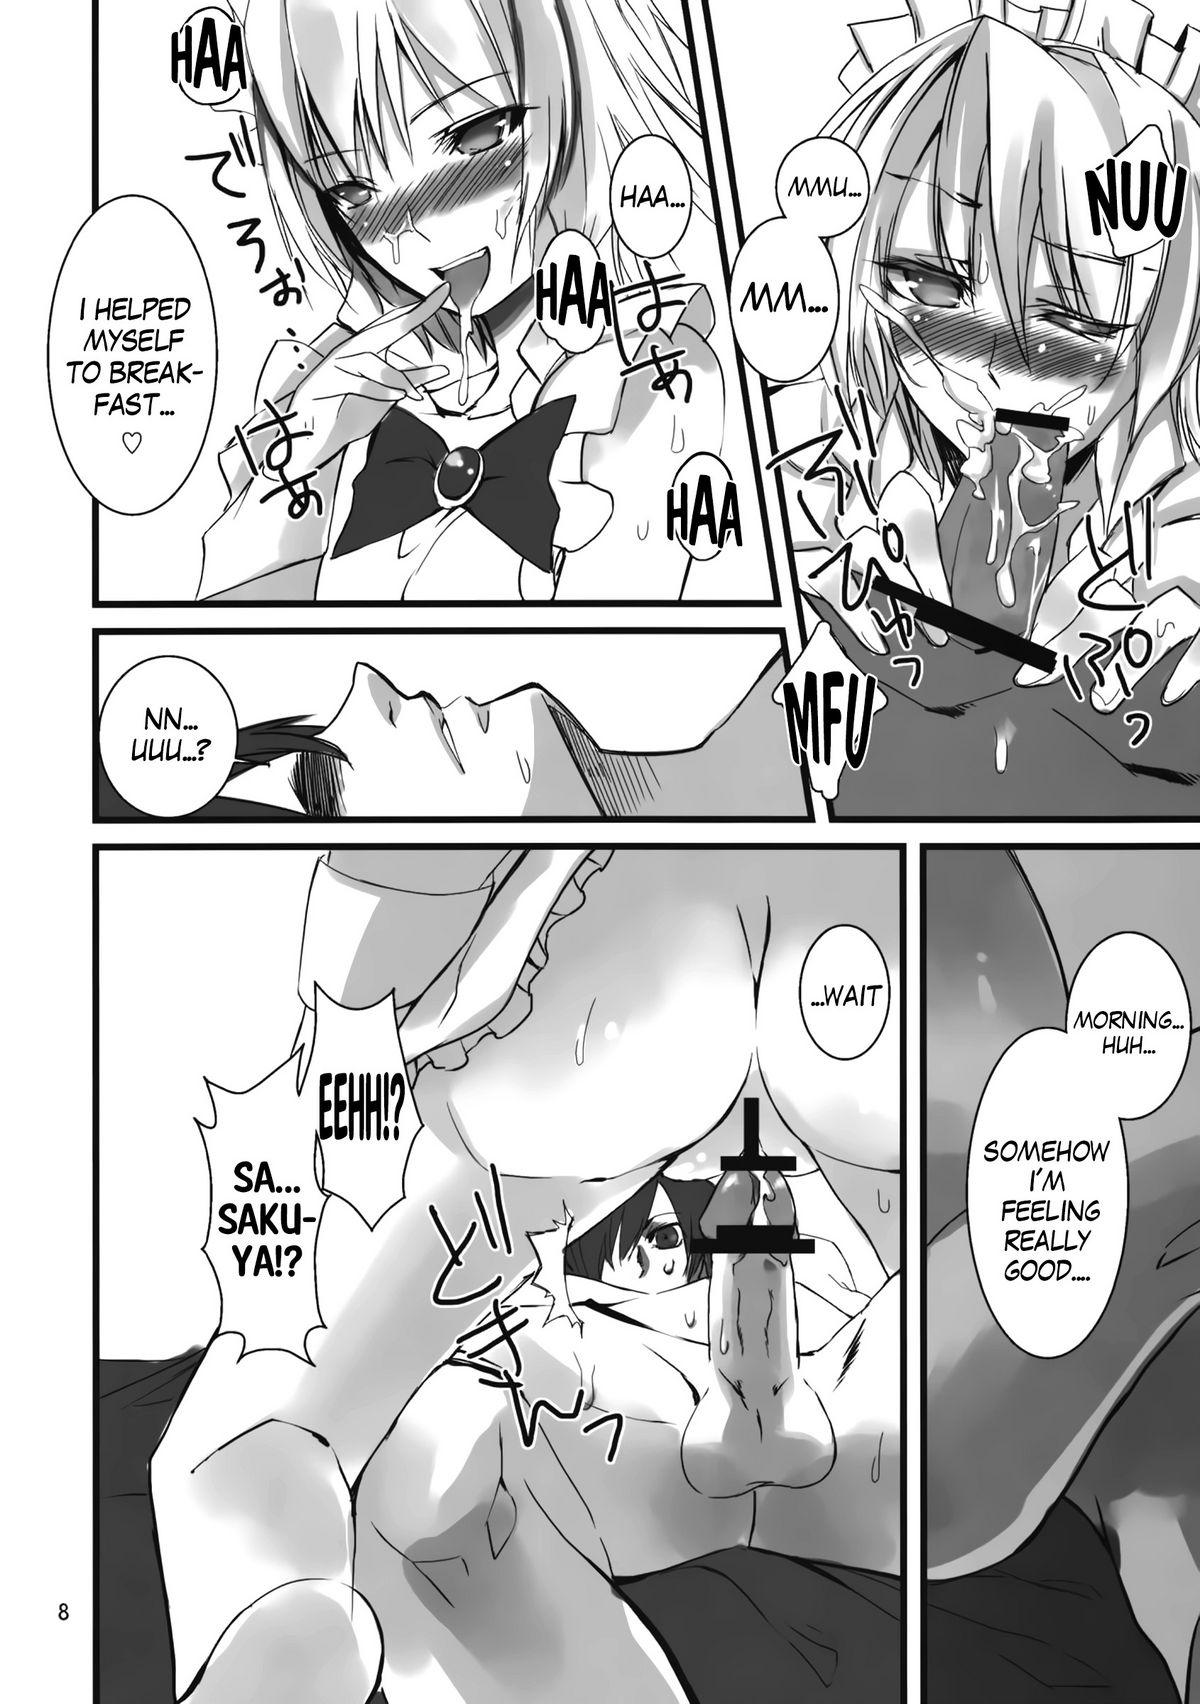 Lez 1 day my maid - Touhou project Pendeja - Page 8